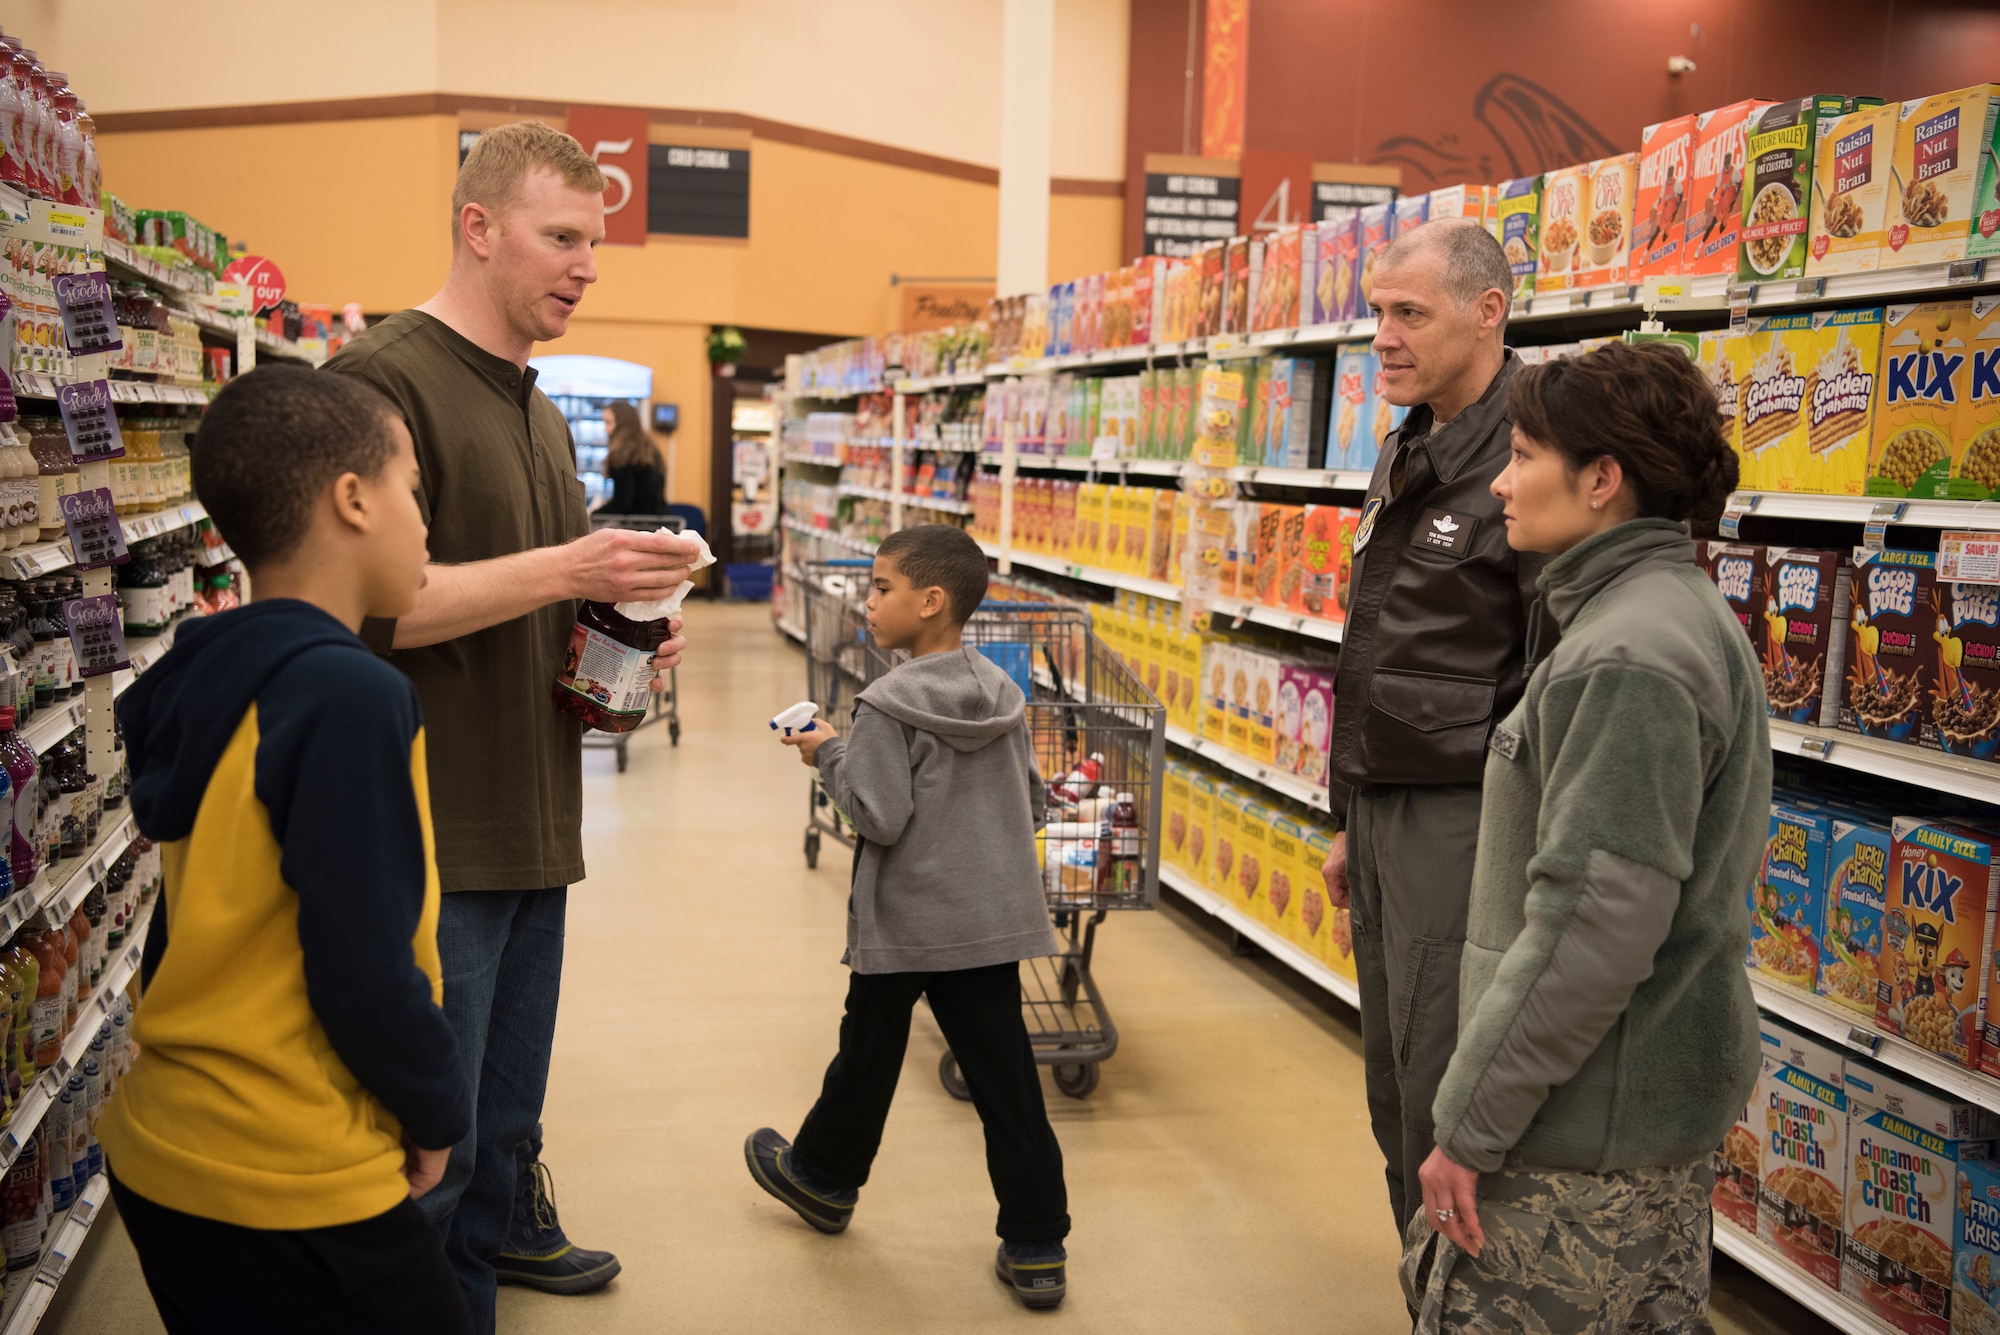 Air Force Lt. Gen. Tom Bussiere, Commander of Alaskan North American Aerospace Defense Command, Alaskan Command, and the Eleventh Air Force, and 673d Air Base Wing Commander Col. Patricia A. Csànk, speak with volunteers at the Joint Base Elmendorf-Richardson, Alaska, Commissary Dec. 1, 2018. In less than 48 hours after the 7.0 magnitude Earthquake striking the Anchorage area at 8:29 a.m. the morning of Nov.30, 2018, JBER is mission ready and capable of resuming regular operations.